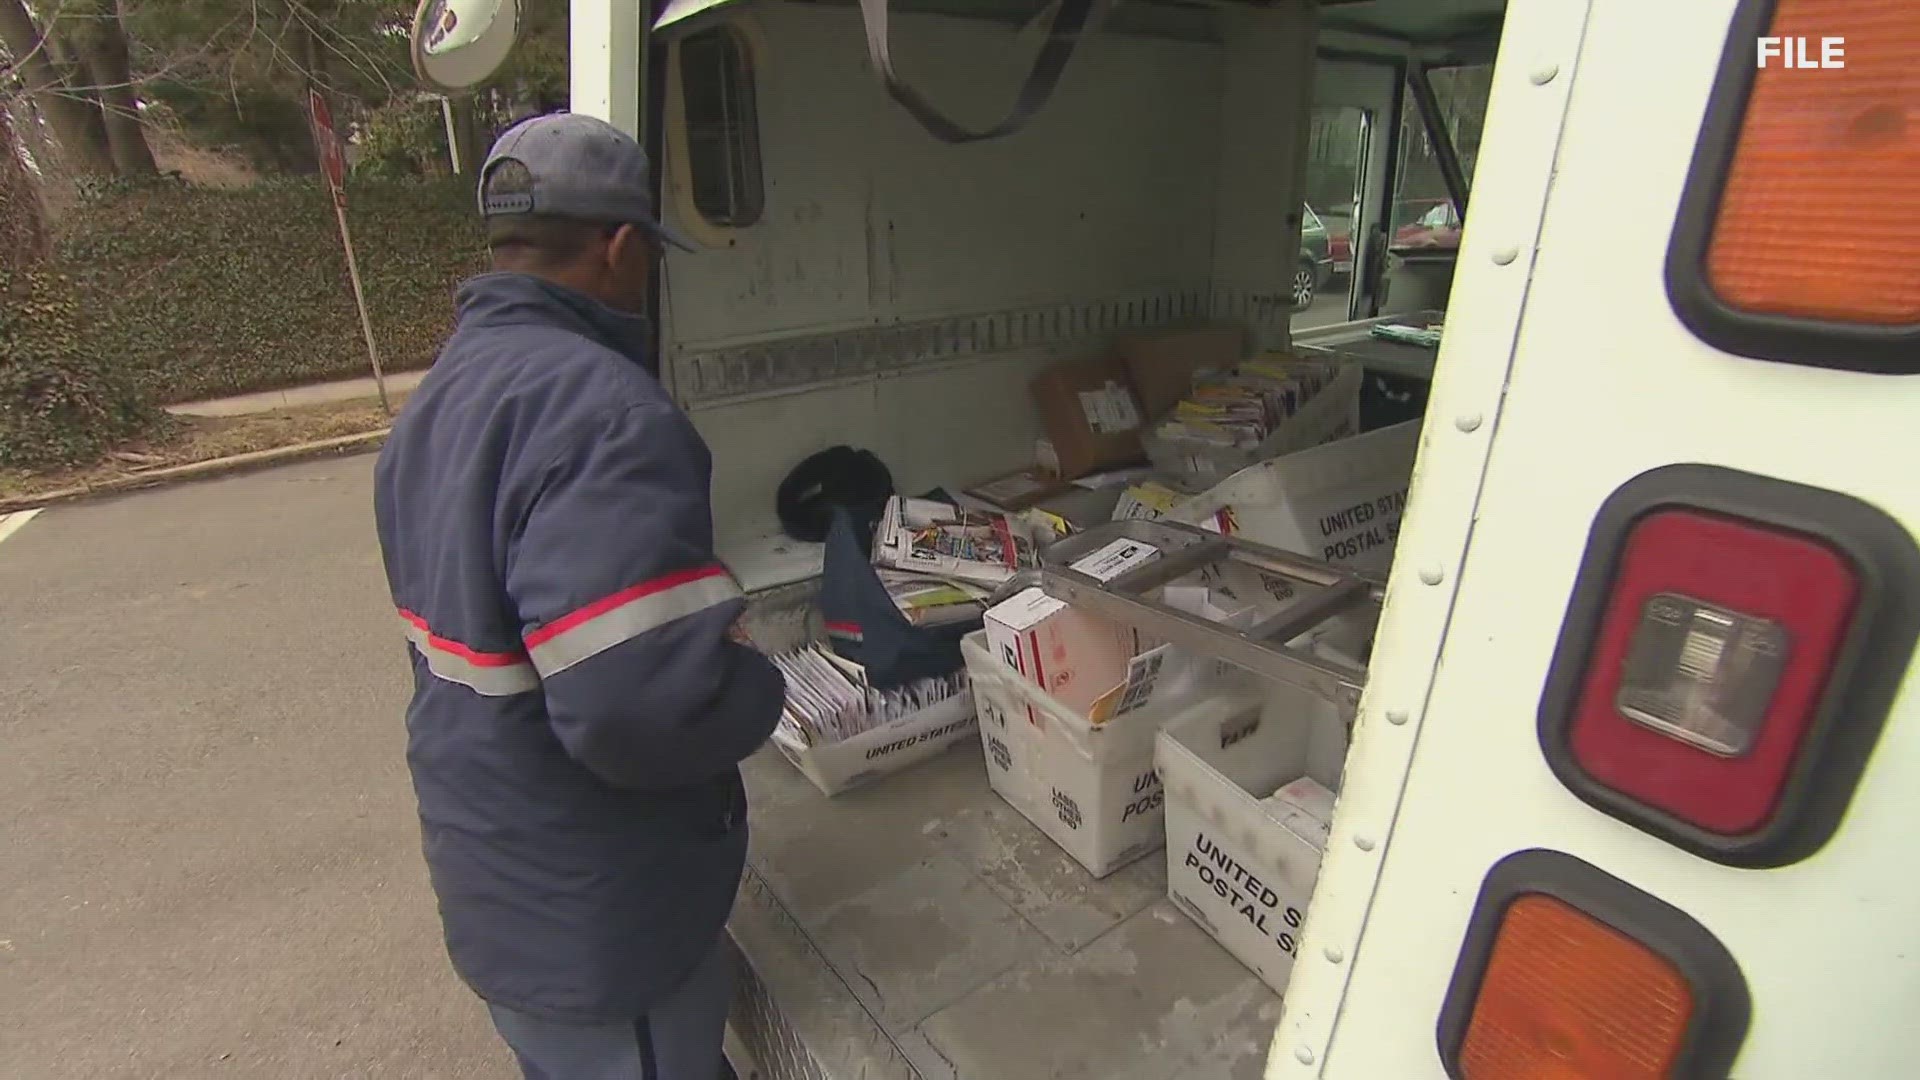 Several St. Louis-area residents have been waiting for letters and packages to arrive at their doorsteps. Here's why they have yet to receive deliveries.